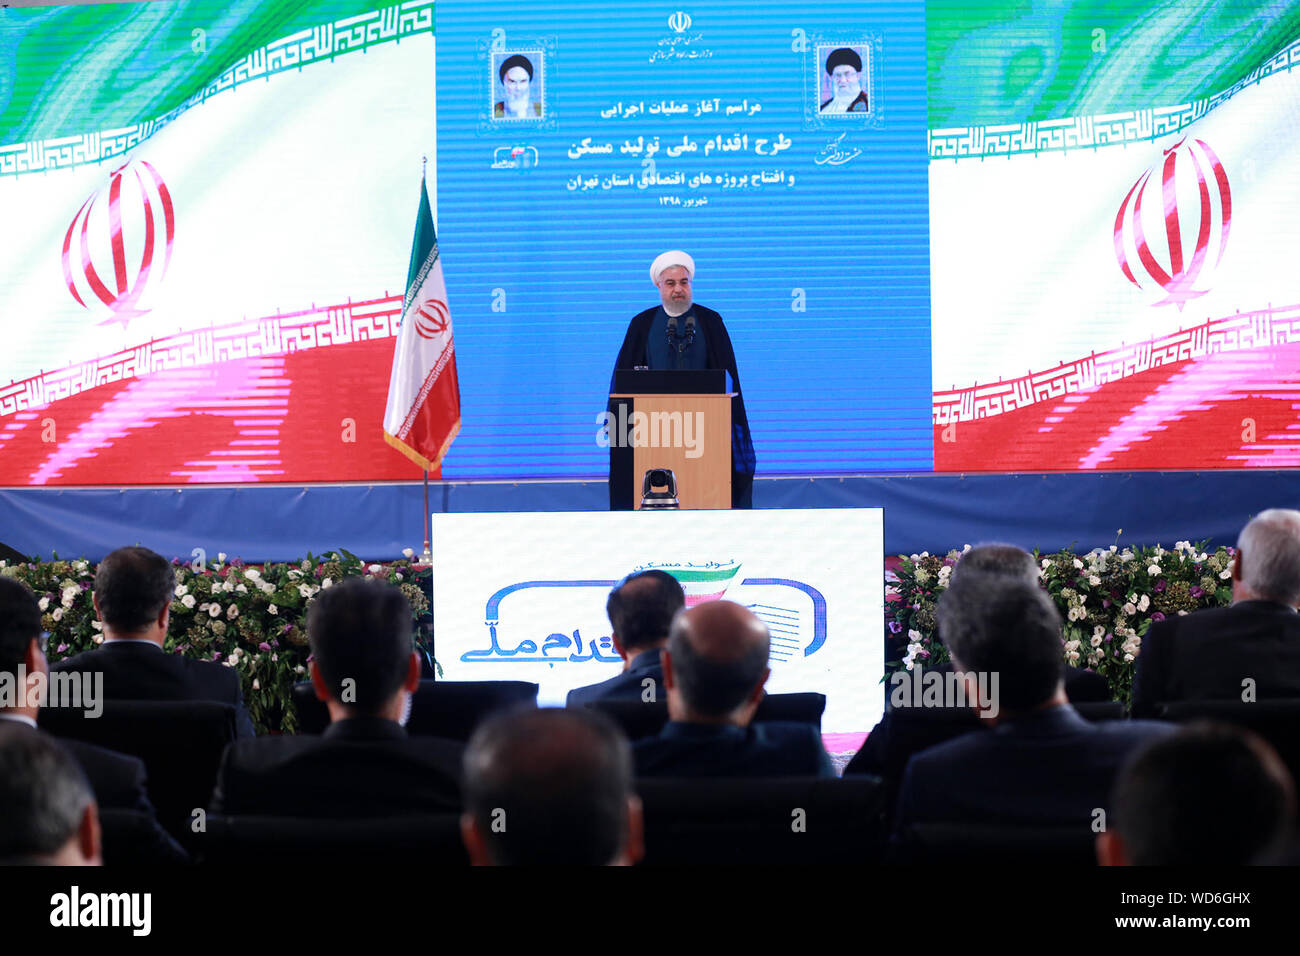 (190829) -- BEIJING, Aug. 29, 2019 (Xinhua) -- Iranian President Hassan Rouhani delivers a speech in Tehran, Iran, on Aug. 27, 2019. Iranian officials on Tuesday urged the United States to lift its sanctions against Iran to pave the way for talks on mutual issues. (Iran's Presidential Office/Handout via Xinhua) Stock Photo